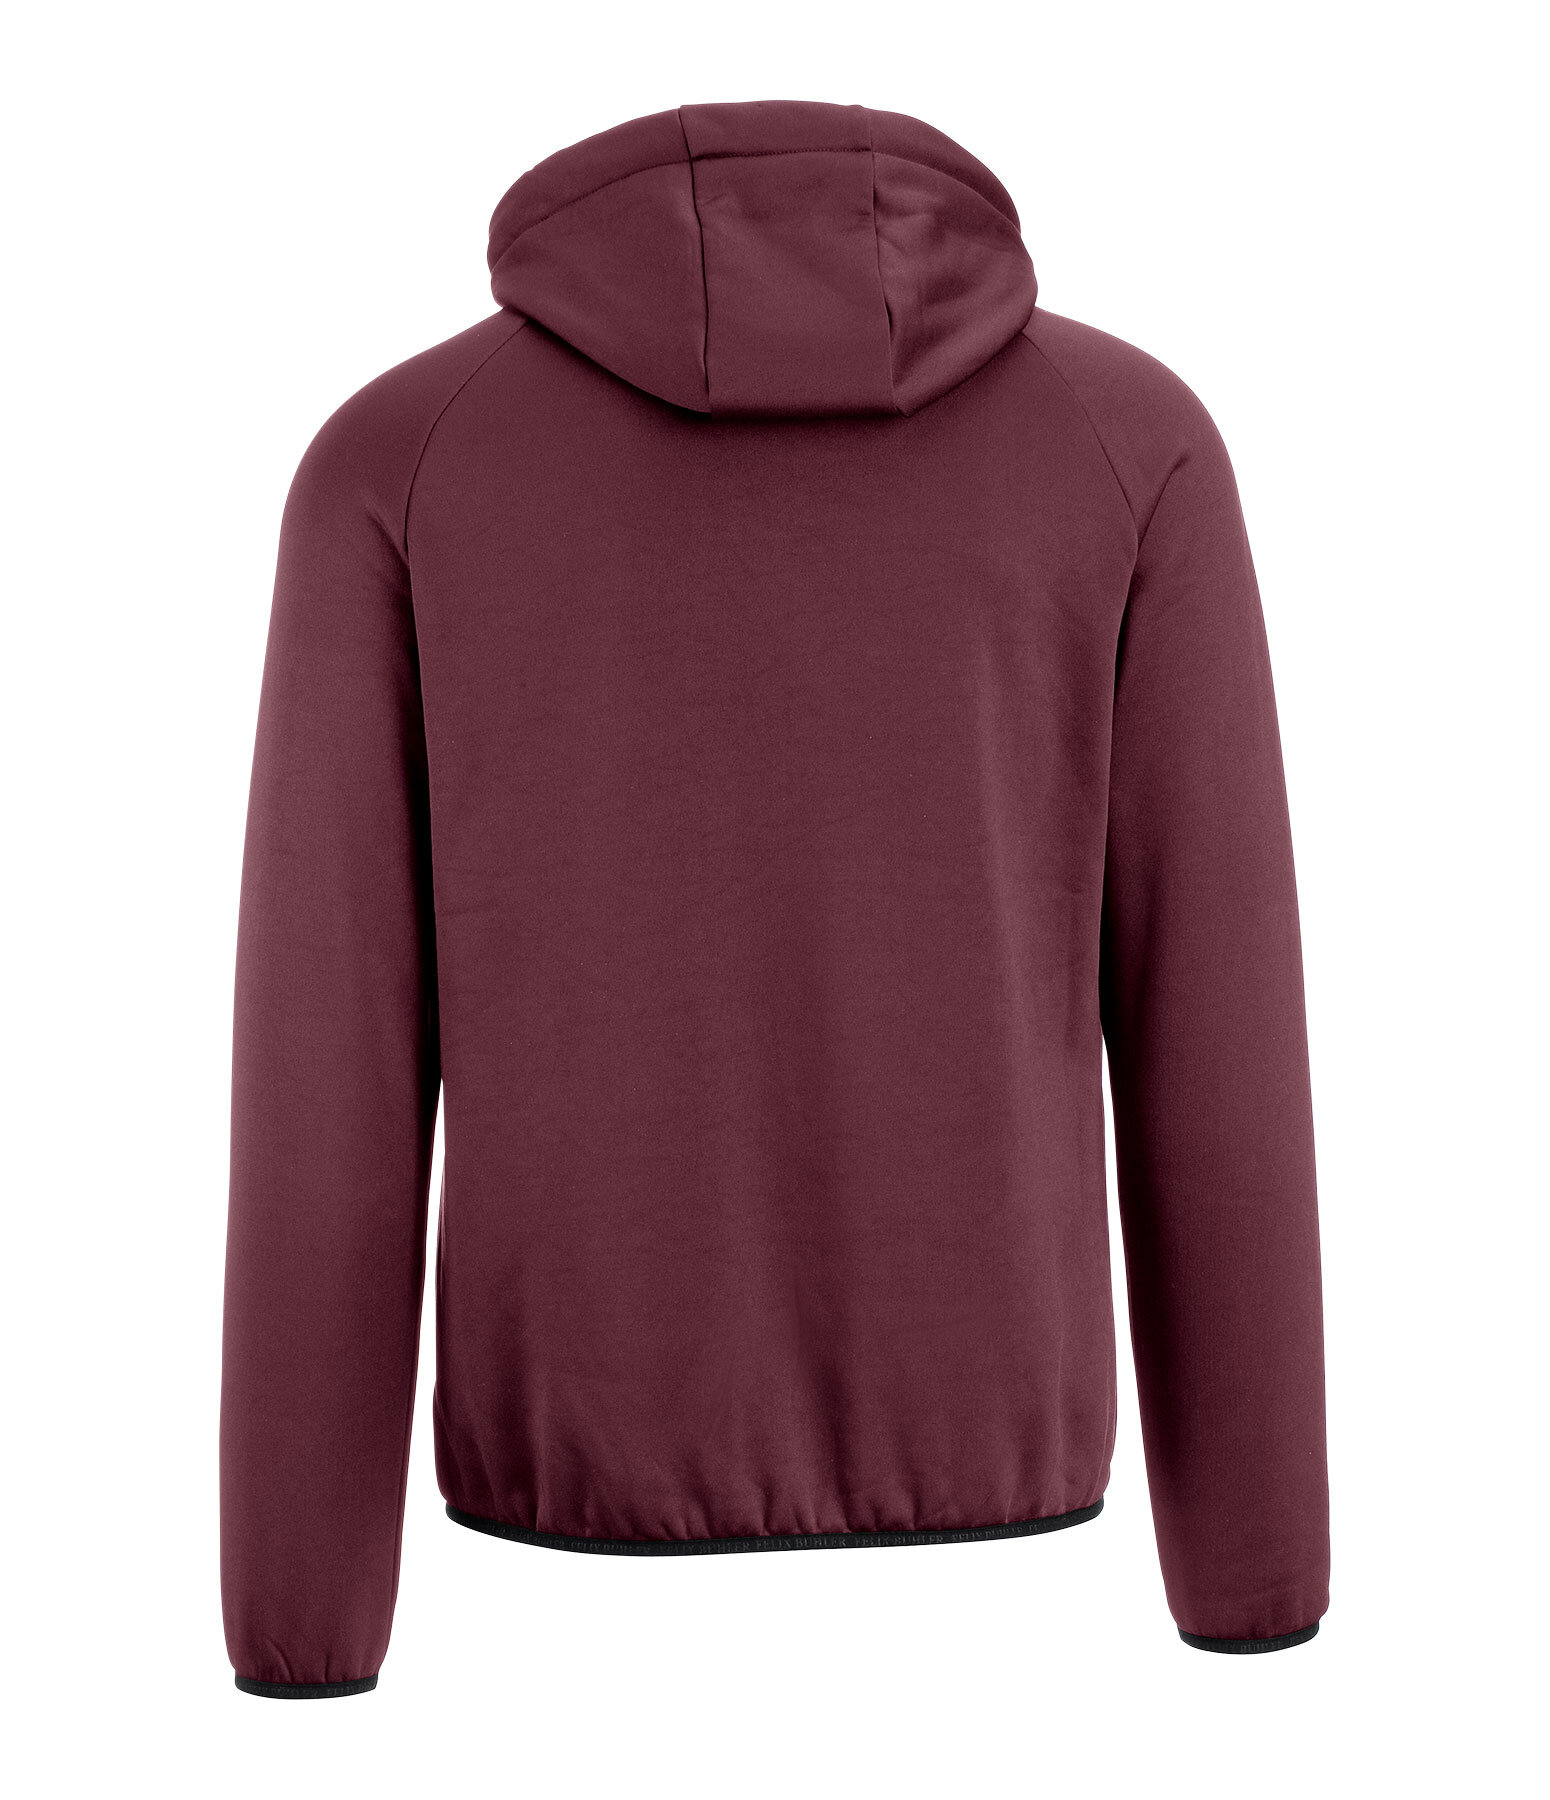 Sweat  capuche Performance stretch homme  Macon